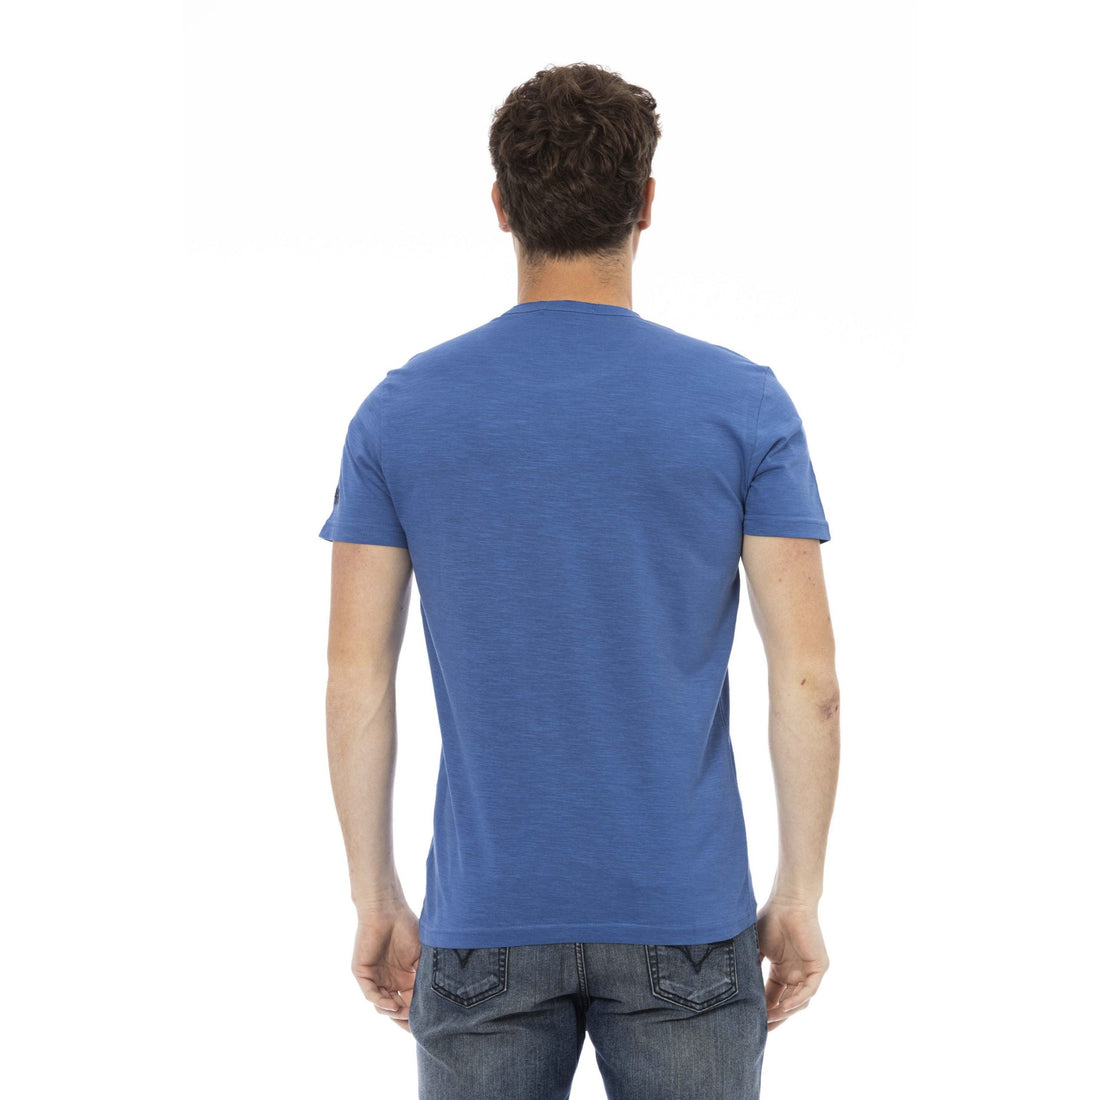 Trussardi Action Sophisticated Blue Tee with Front Print